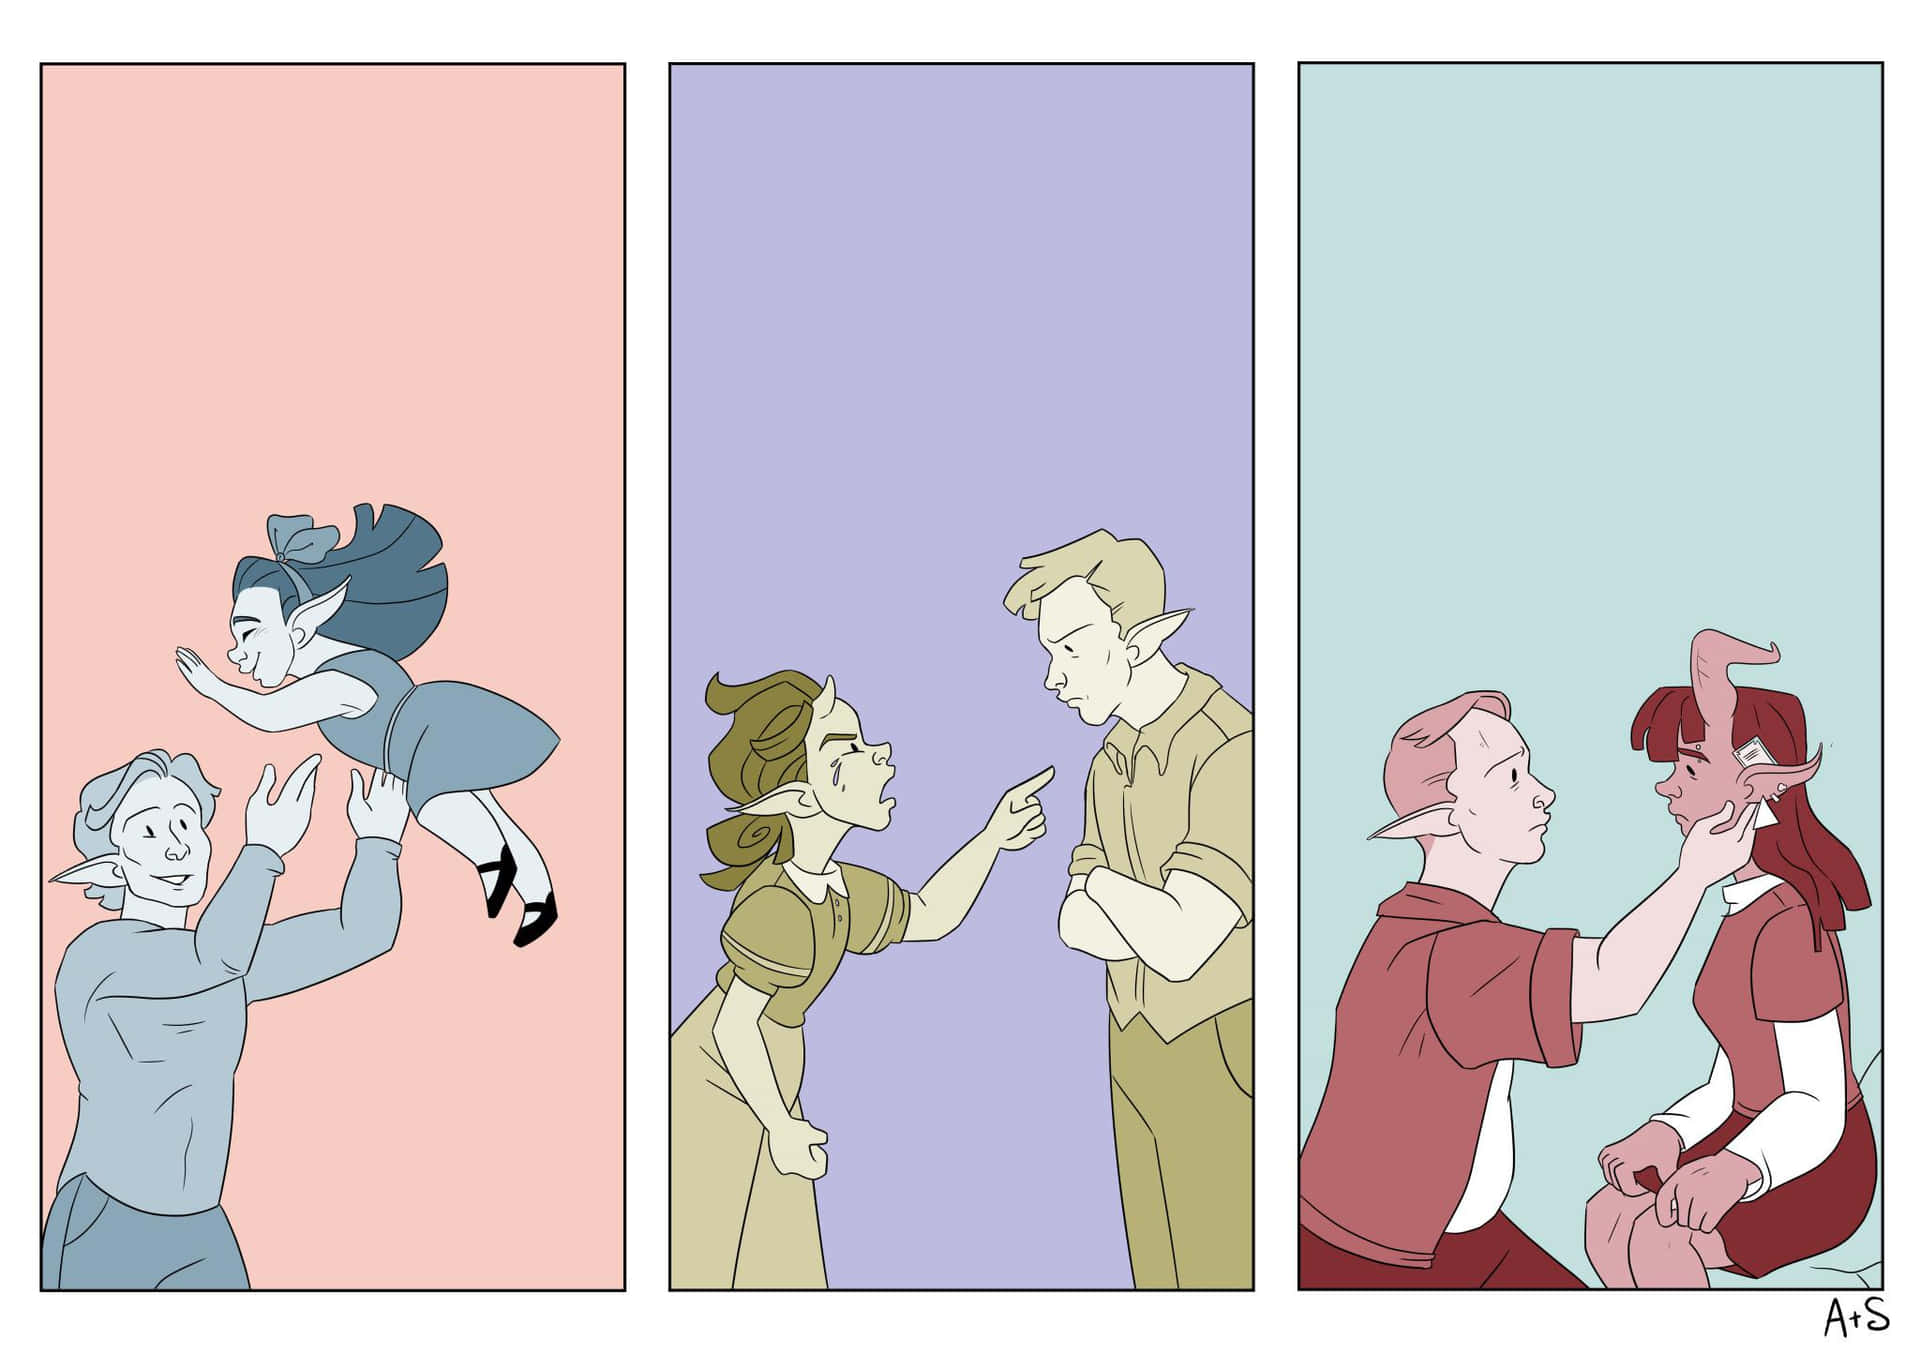 A Comic Strip With A Couple Of People Holding Hands